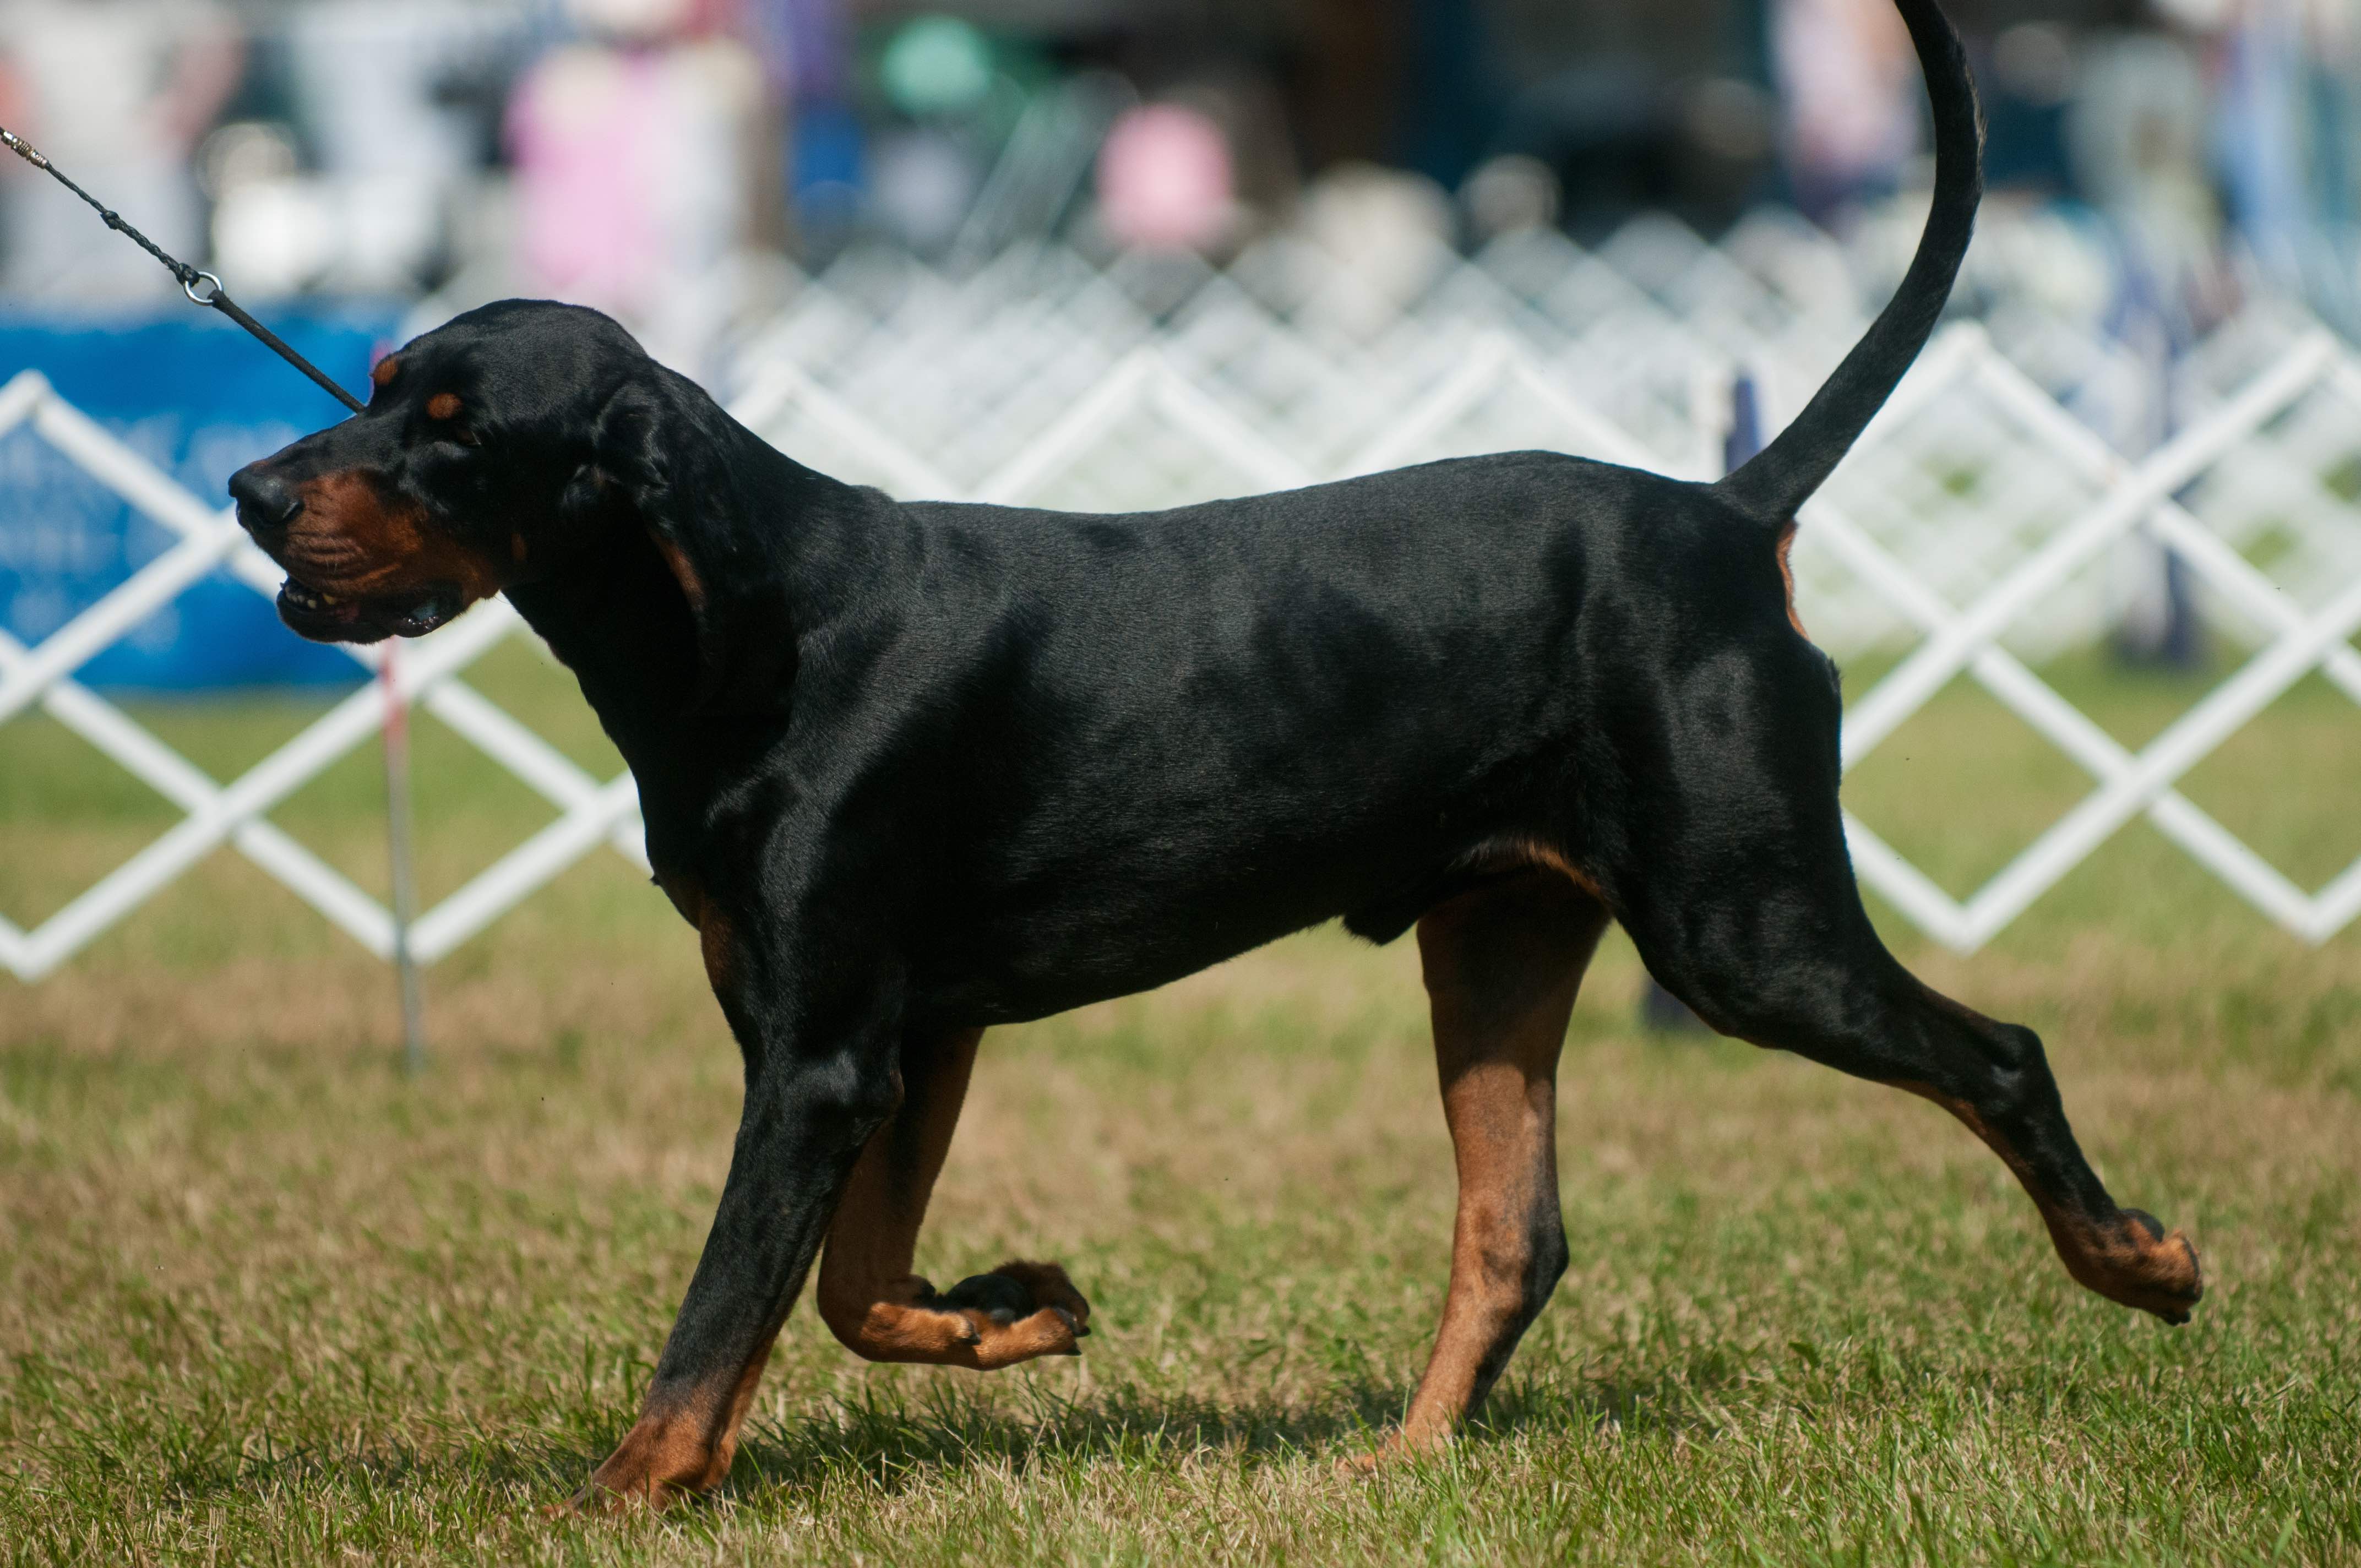 black and tan coonhound in a dog show